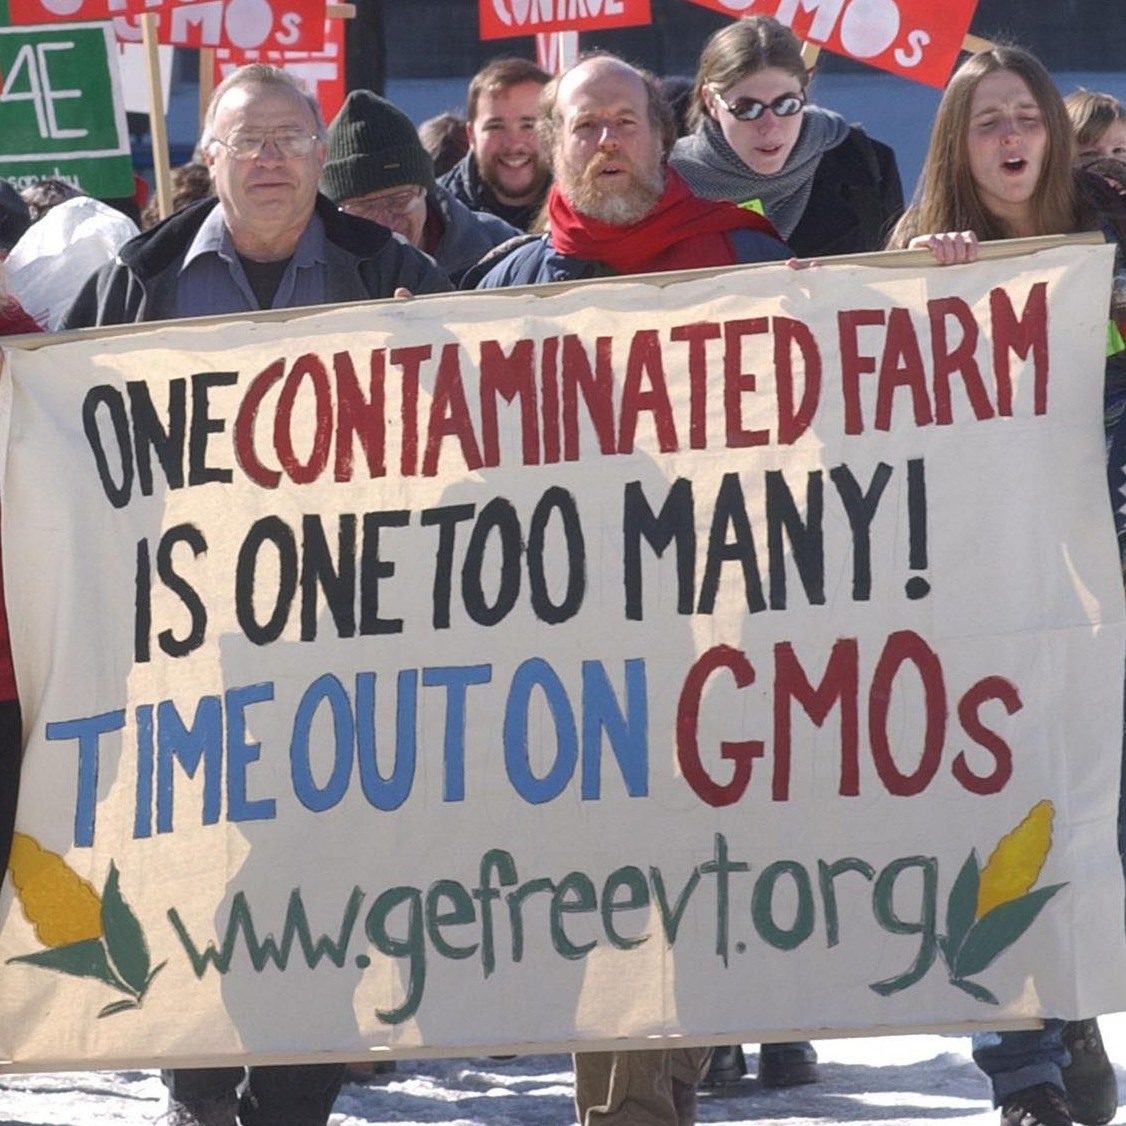 Protesters march to the Statehouse in Montpelier, Vt., Thursday, Feb. 26, 2004, to call for a time out on genetically engineered crops. They went inside to listen to Monsanto lobbyists as they testify before the House Agriculture Committee. Vermont lawmakers are in the process of passing a bill that requires labeling on GMOs. (AP Photo/Toby Talbot)